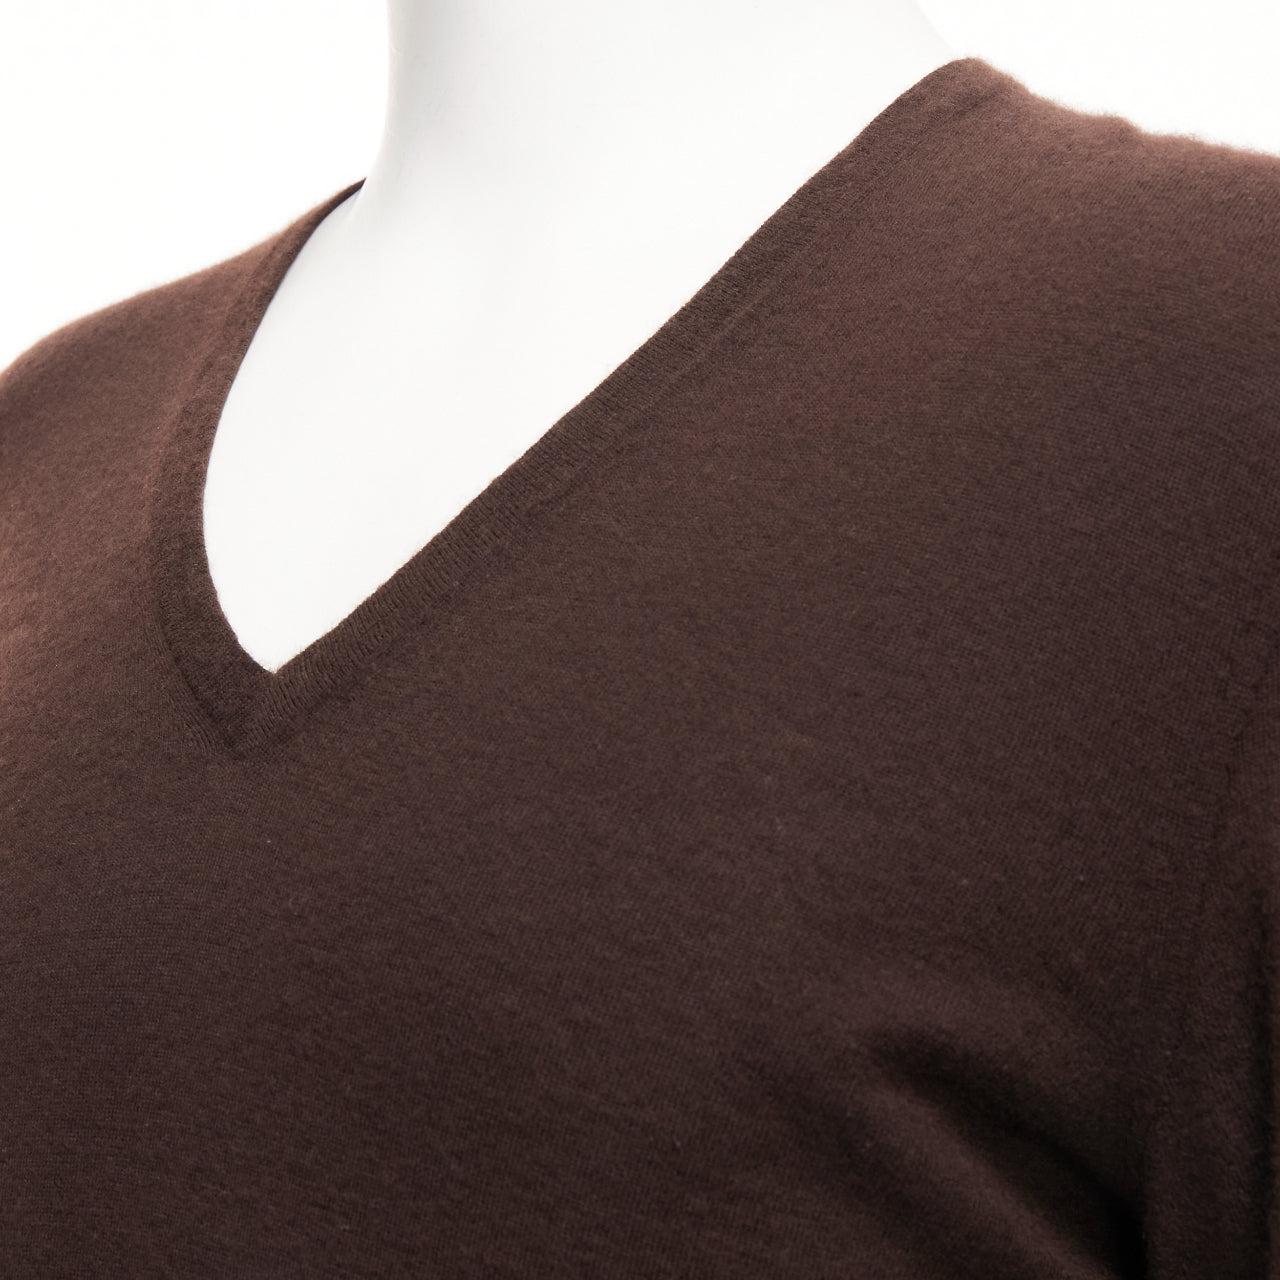 GUCCI Vintage 100% cashmere brown V-neck classic sweater L
Reference: JSLE/A00120
Brand: Gucci
Material: Cashmere
Color: Brown
Pattern: Solid
Closure: Pullover
Made in: Italy

CONDITION:
Condition: Very good, this item was pre-owned and is in very